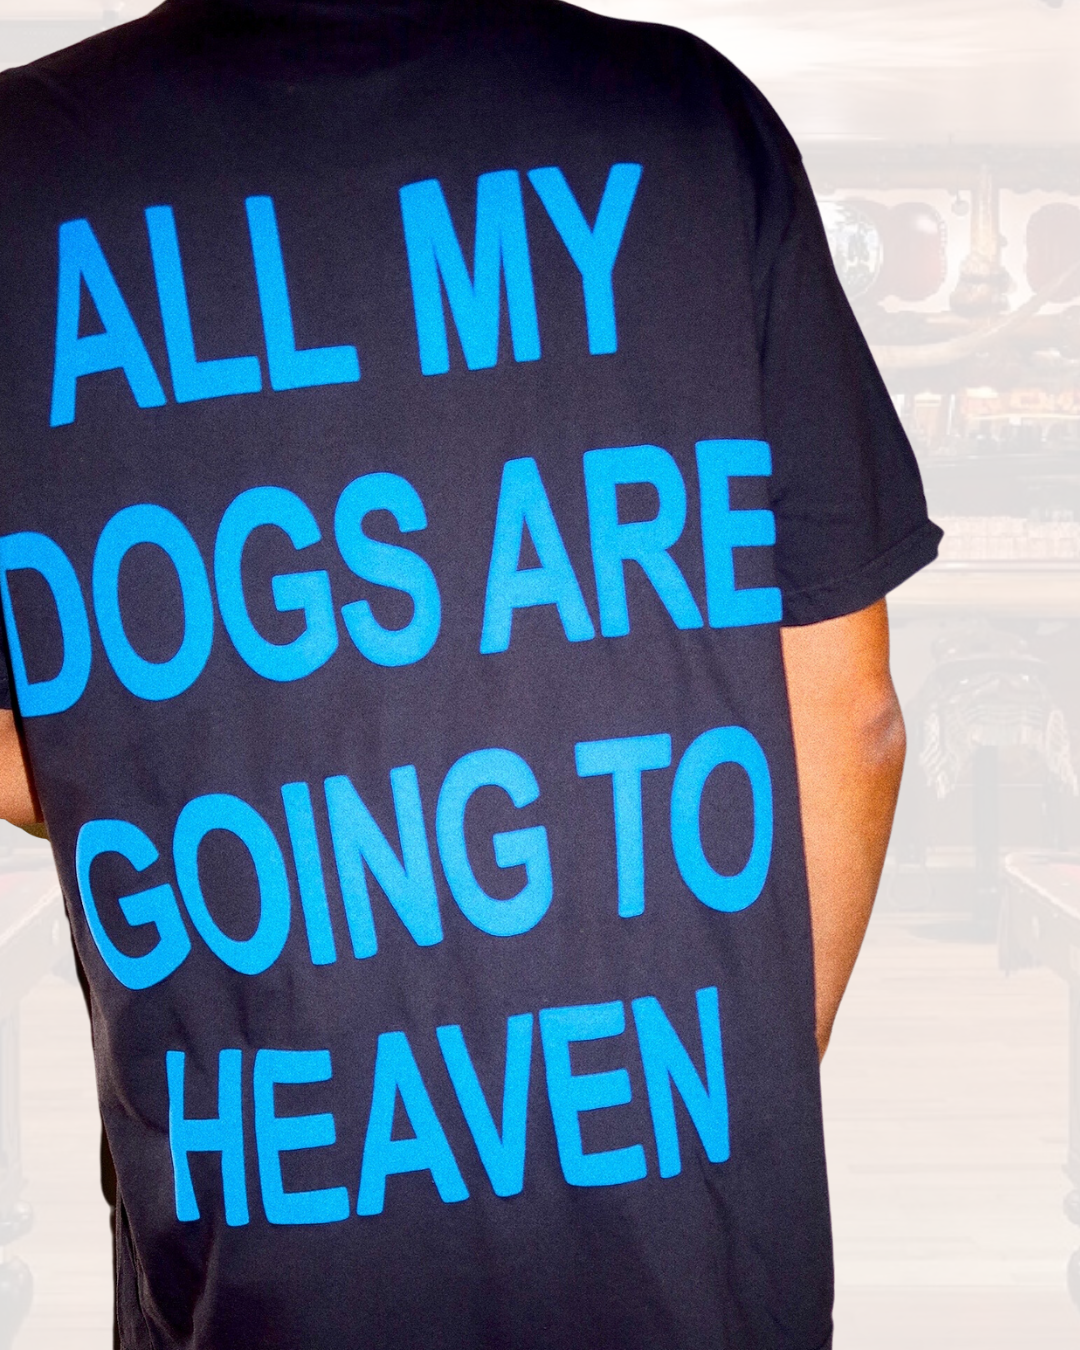 ALL MY DOGS ARE GOING TO HEAVEN Puff T-Shirt